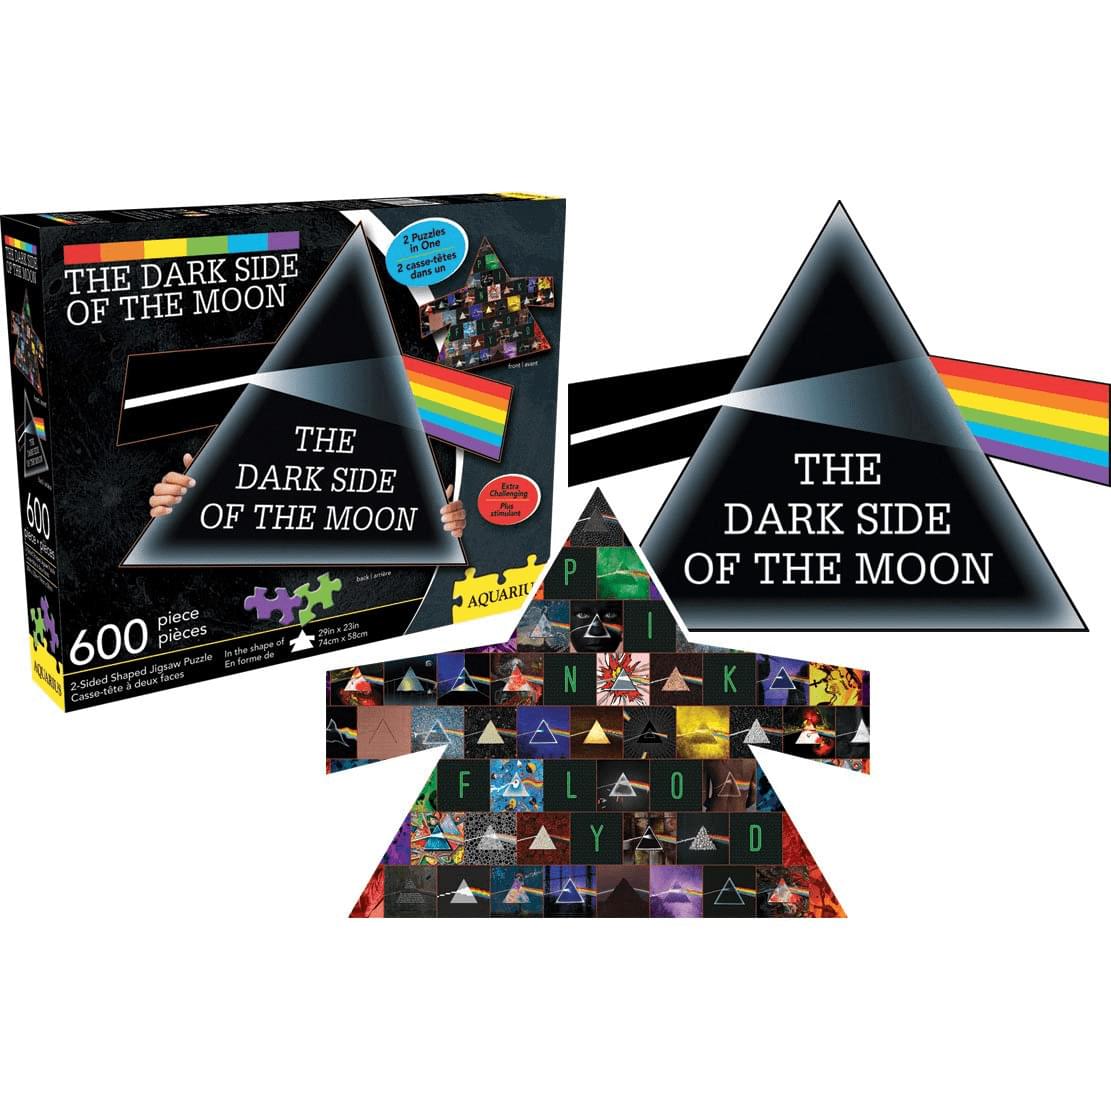 Pink Floyd Dark Side of the Moon 600 Piece Shaped 2 Sided Jigsaw Puzzle